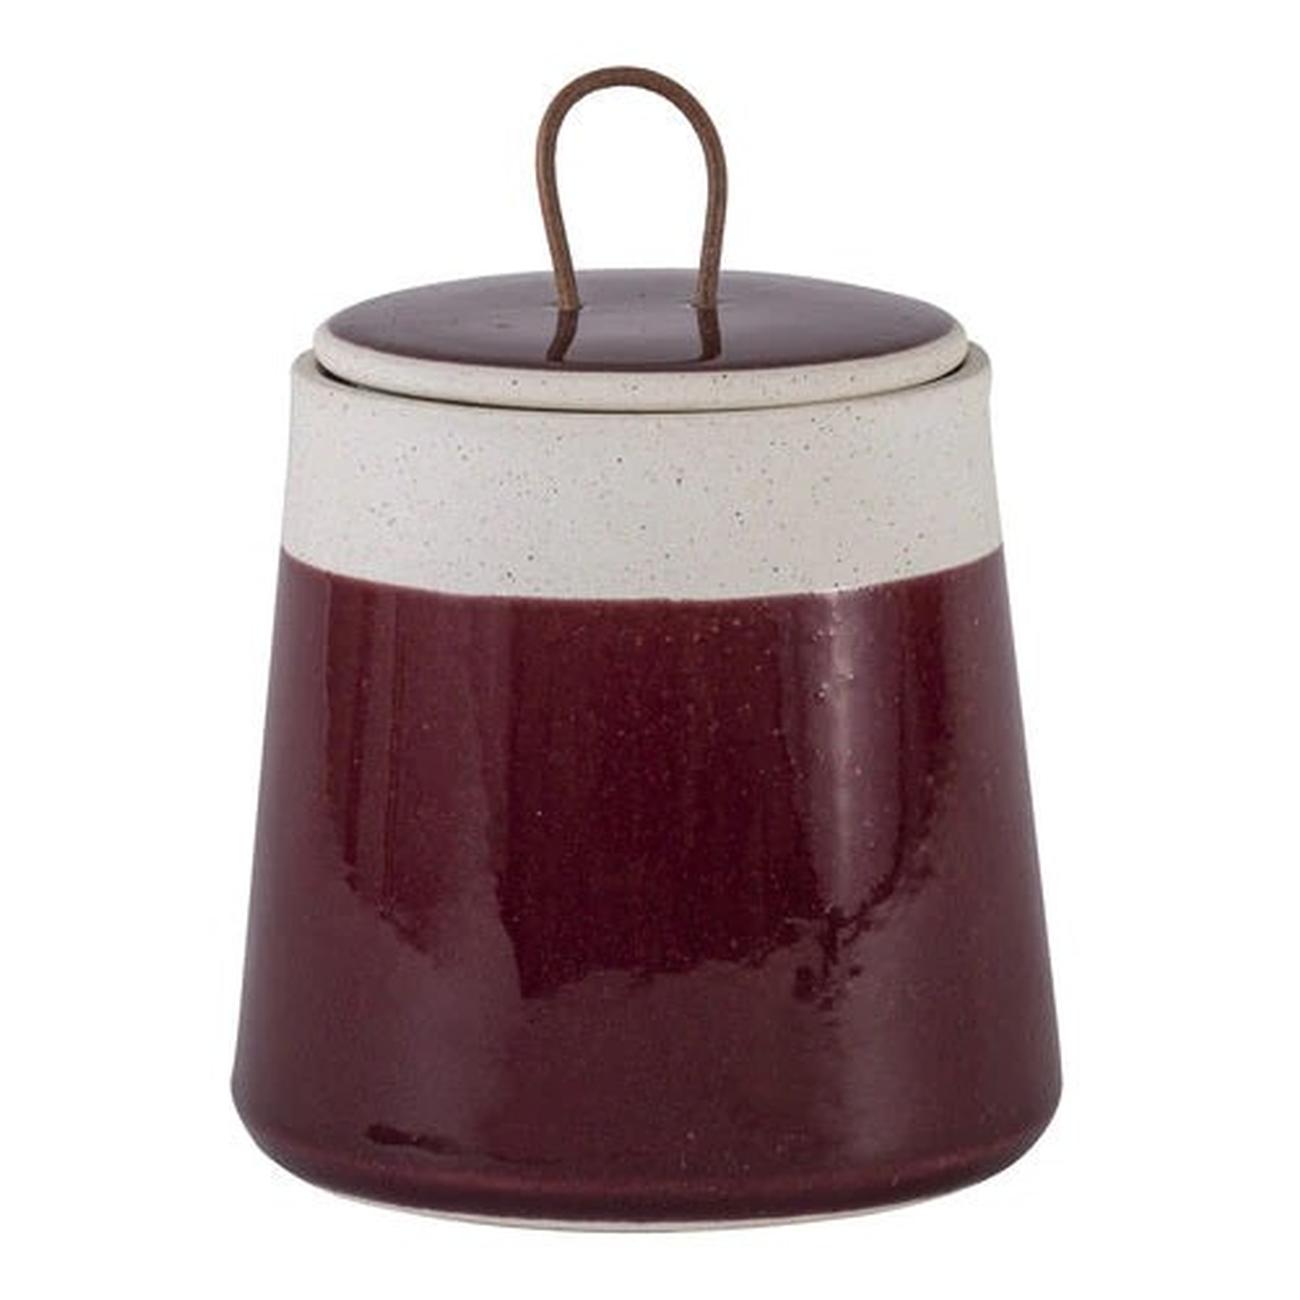 ladelle-aster-plum-canister - Ladelle Aster Canister Plum 1L